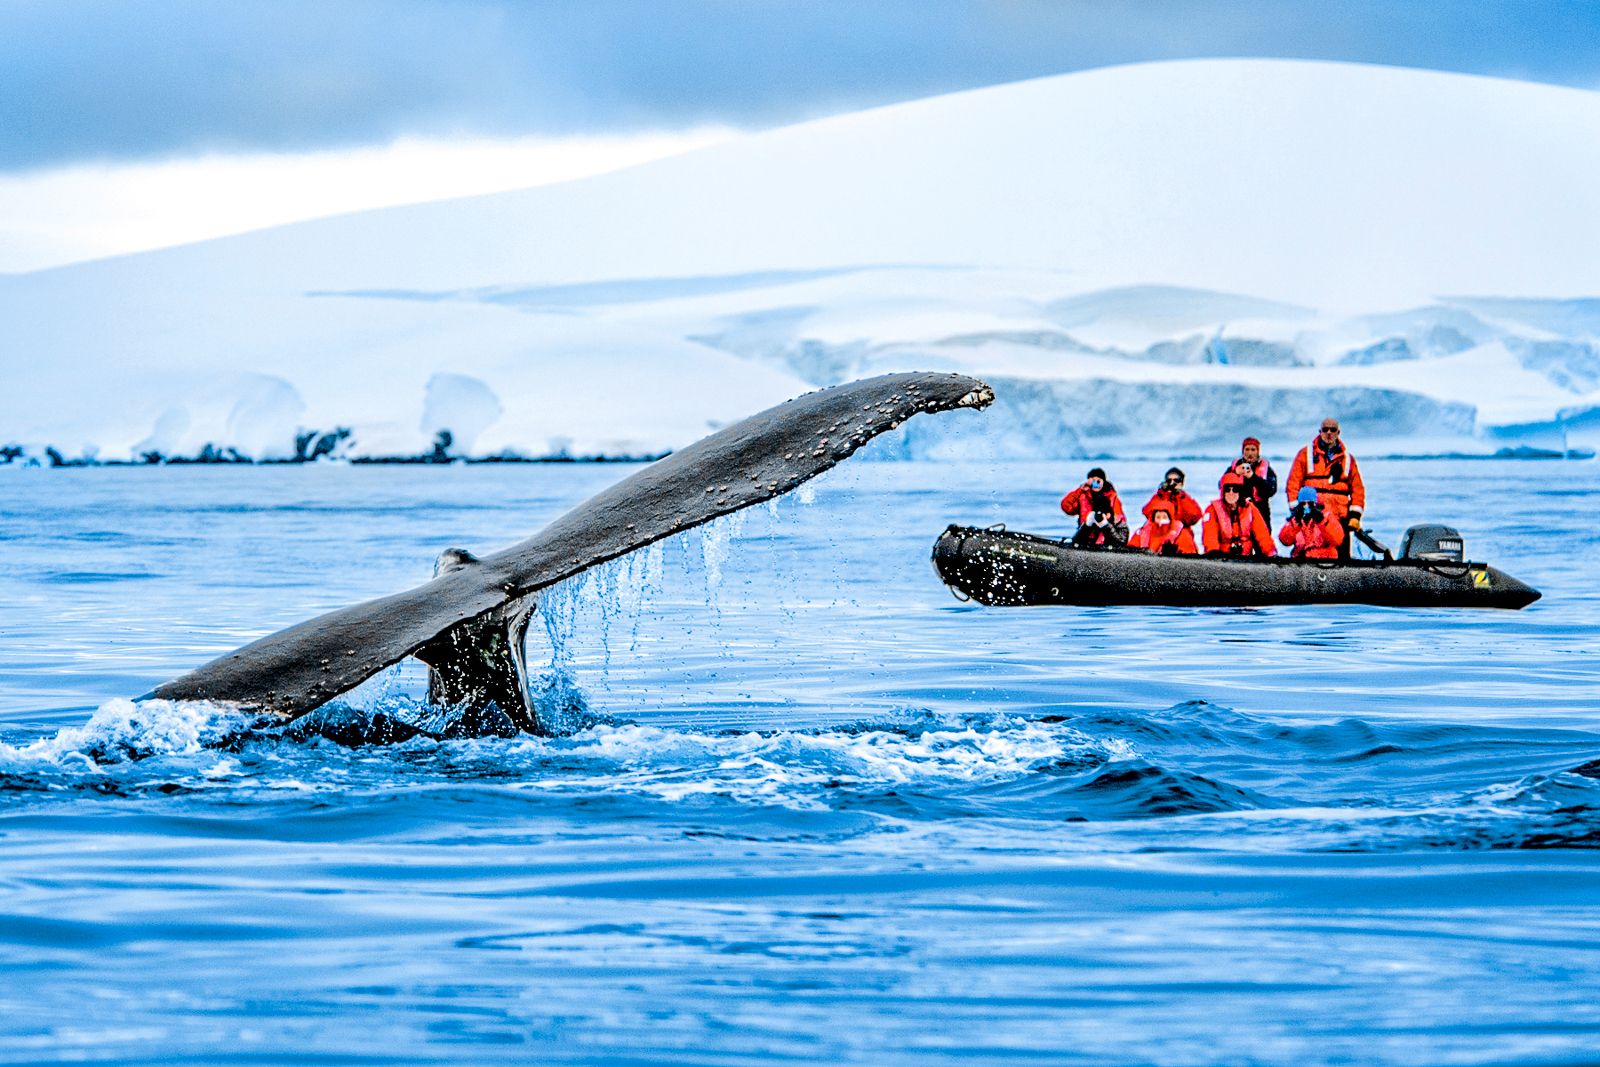 A whale spotted breaching Antarctic waters in a zodiac from Ponant's Le Commandant Charcot cruise ship